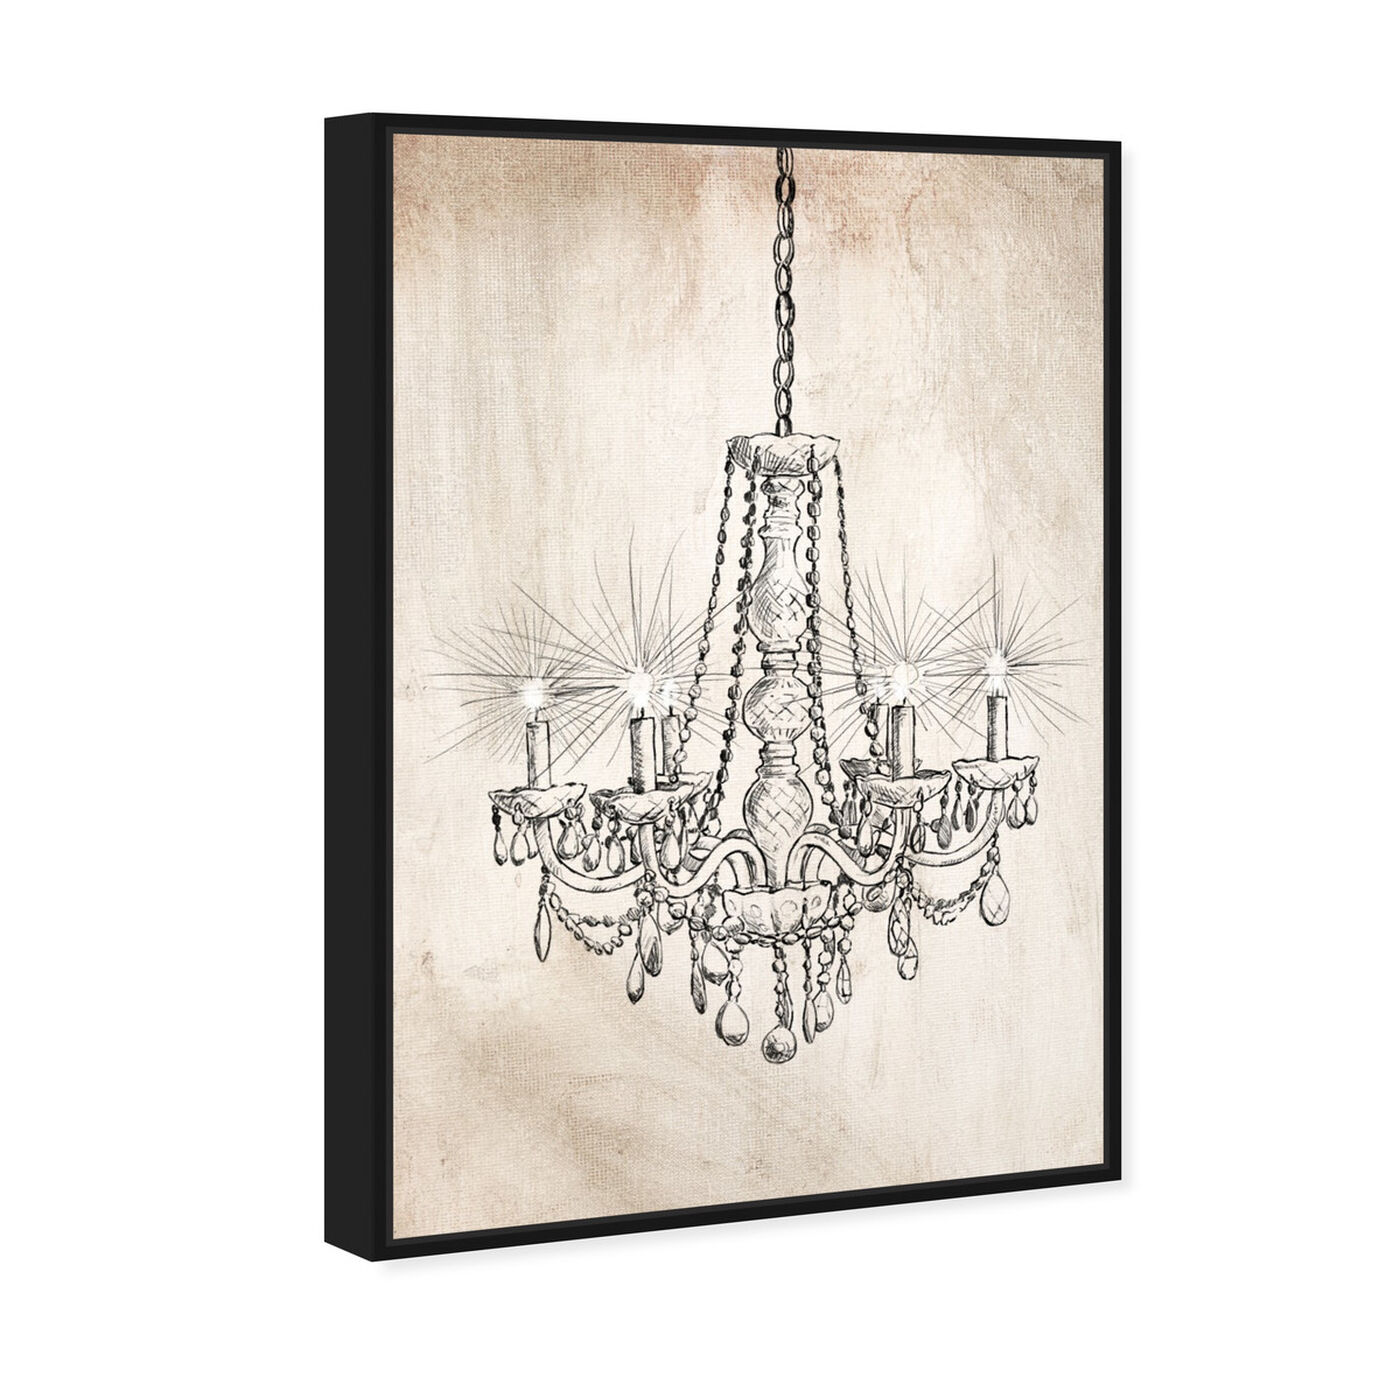 Angled view of Cantora featuring fashion and glam and chandeliers art.